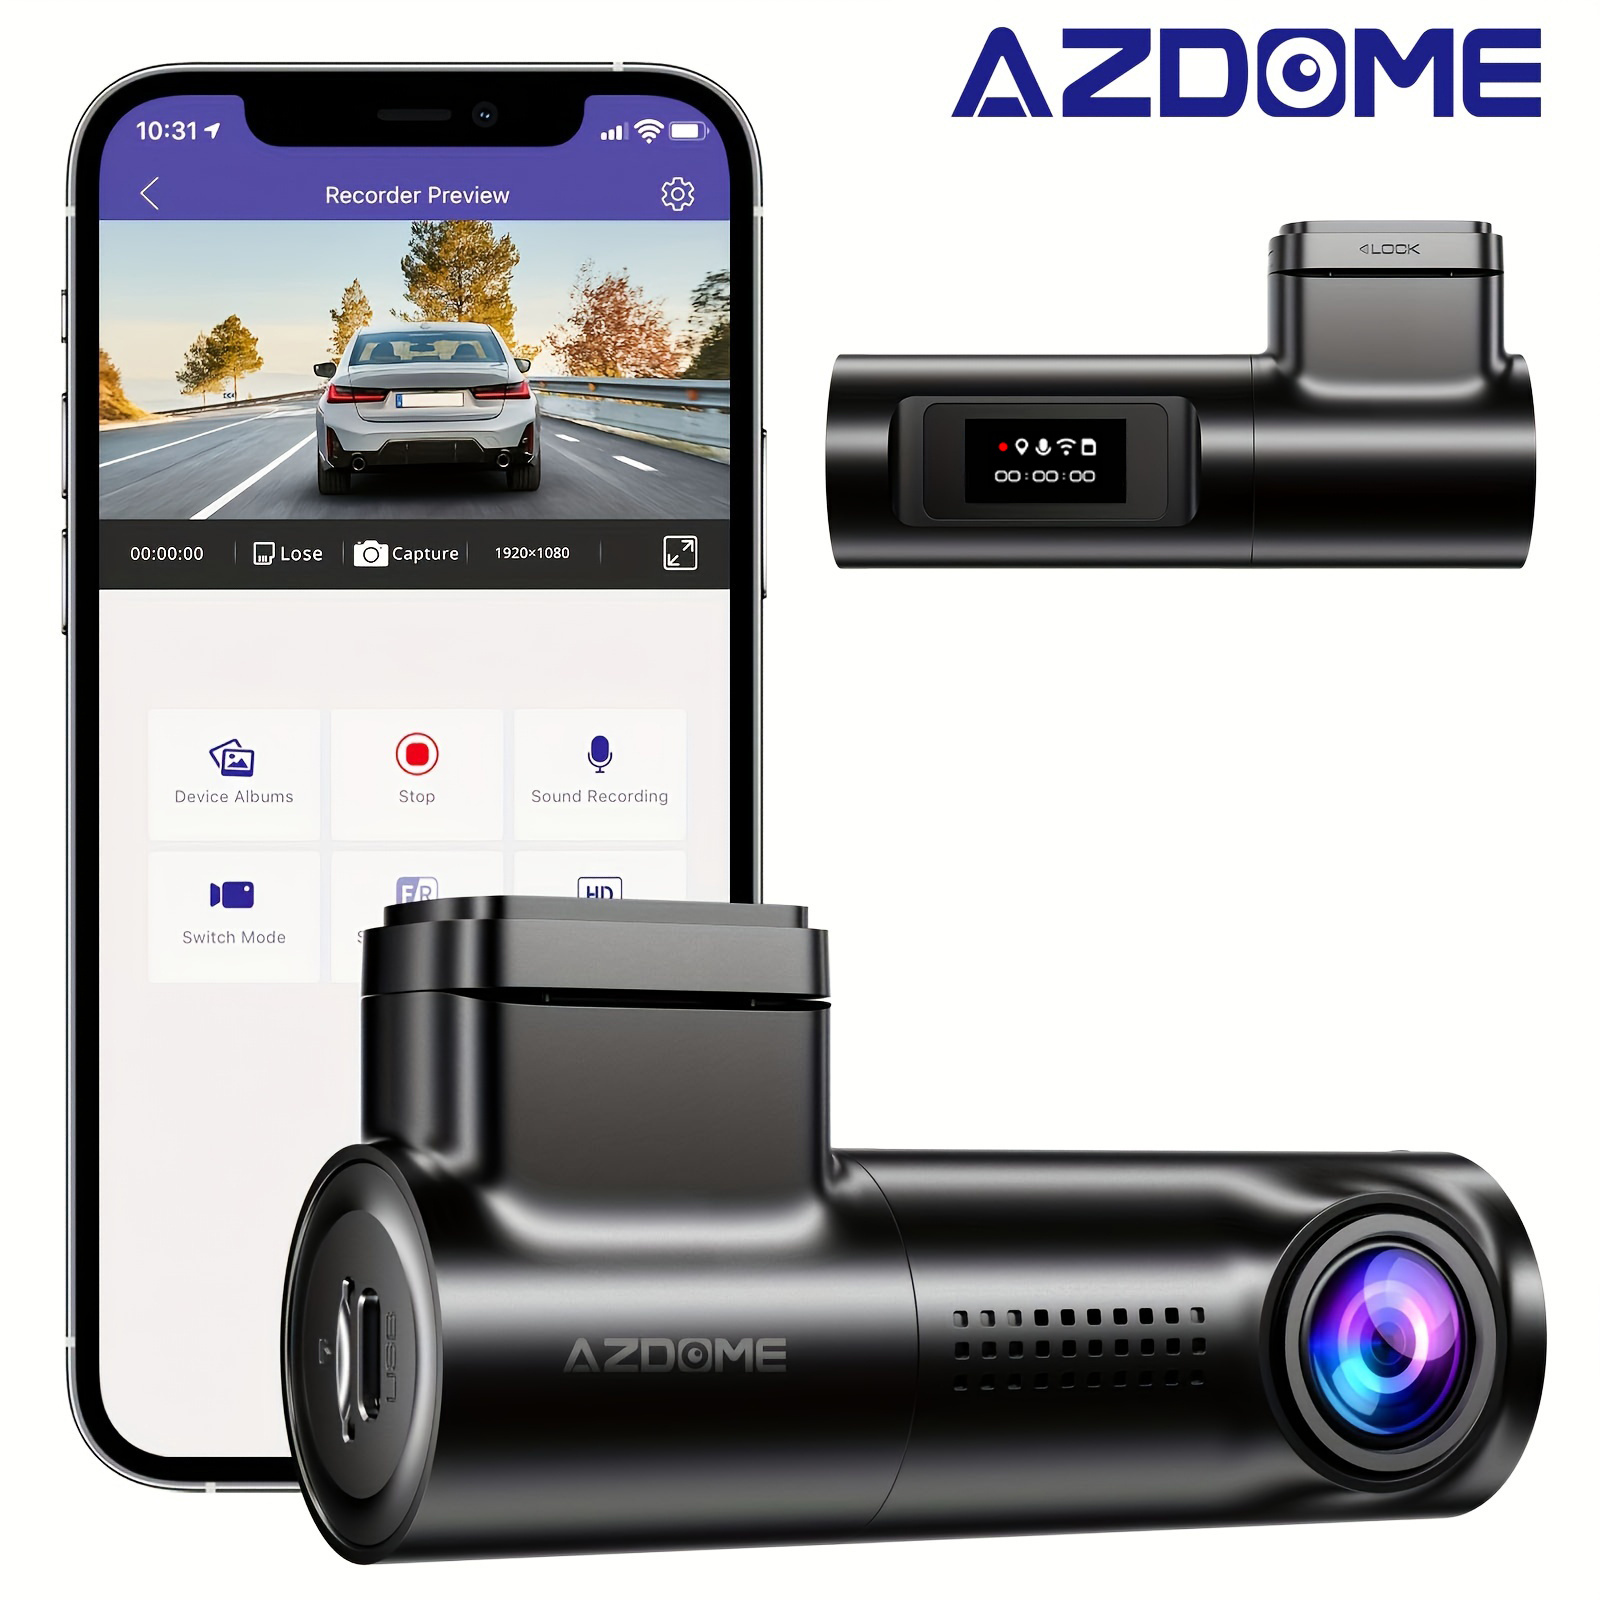 Buy AZDOME GS63H Car DVR Recorder Dash Cam 4K Built-in GPS WiFi Dual Rear  Lens at affordable prices — free shipping, real reviews with photos — Joom